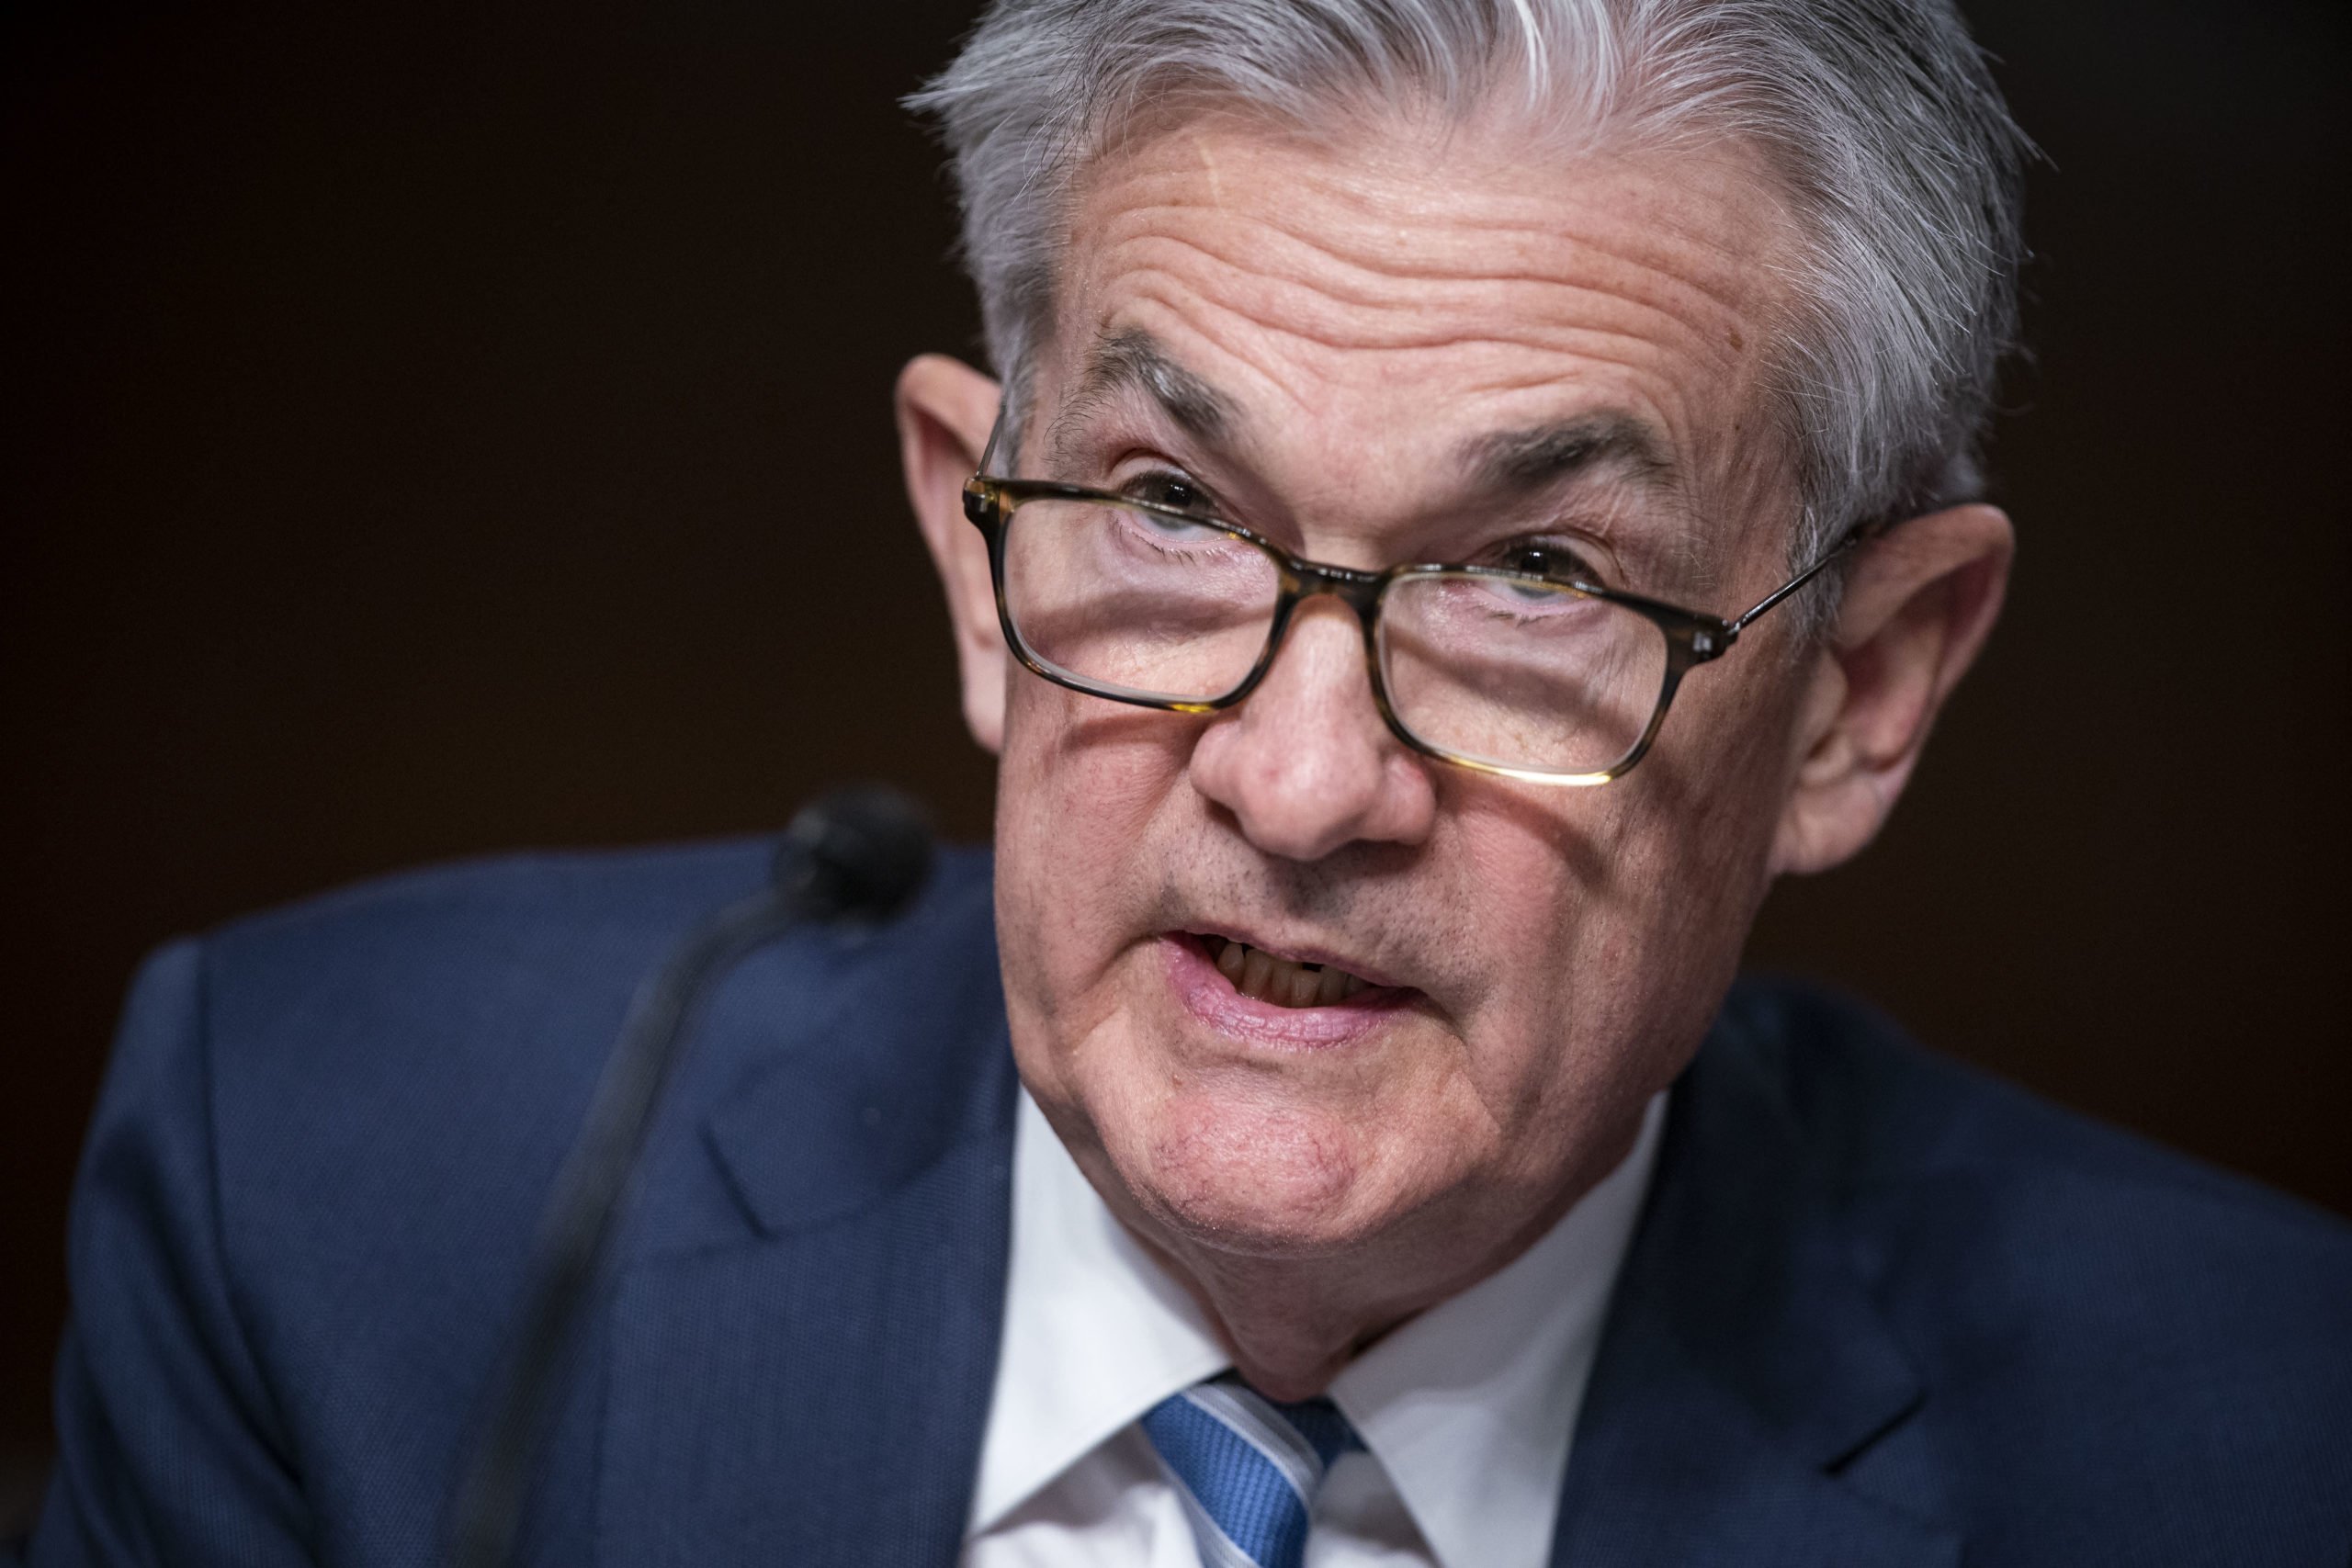 Watch Fed Chair Jerome Powell testify live at his Senate confirmation hearing